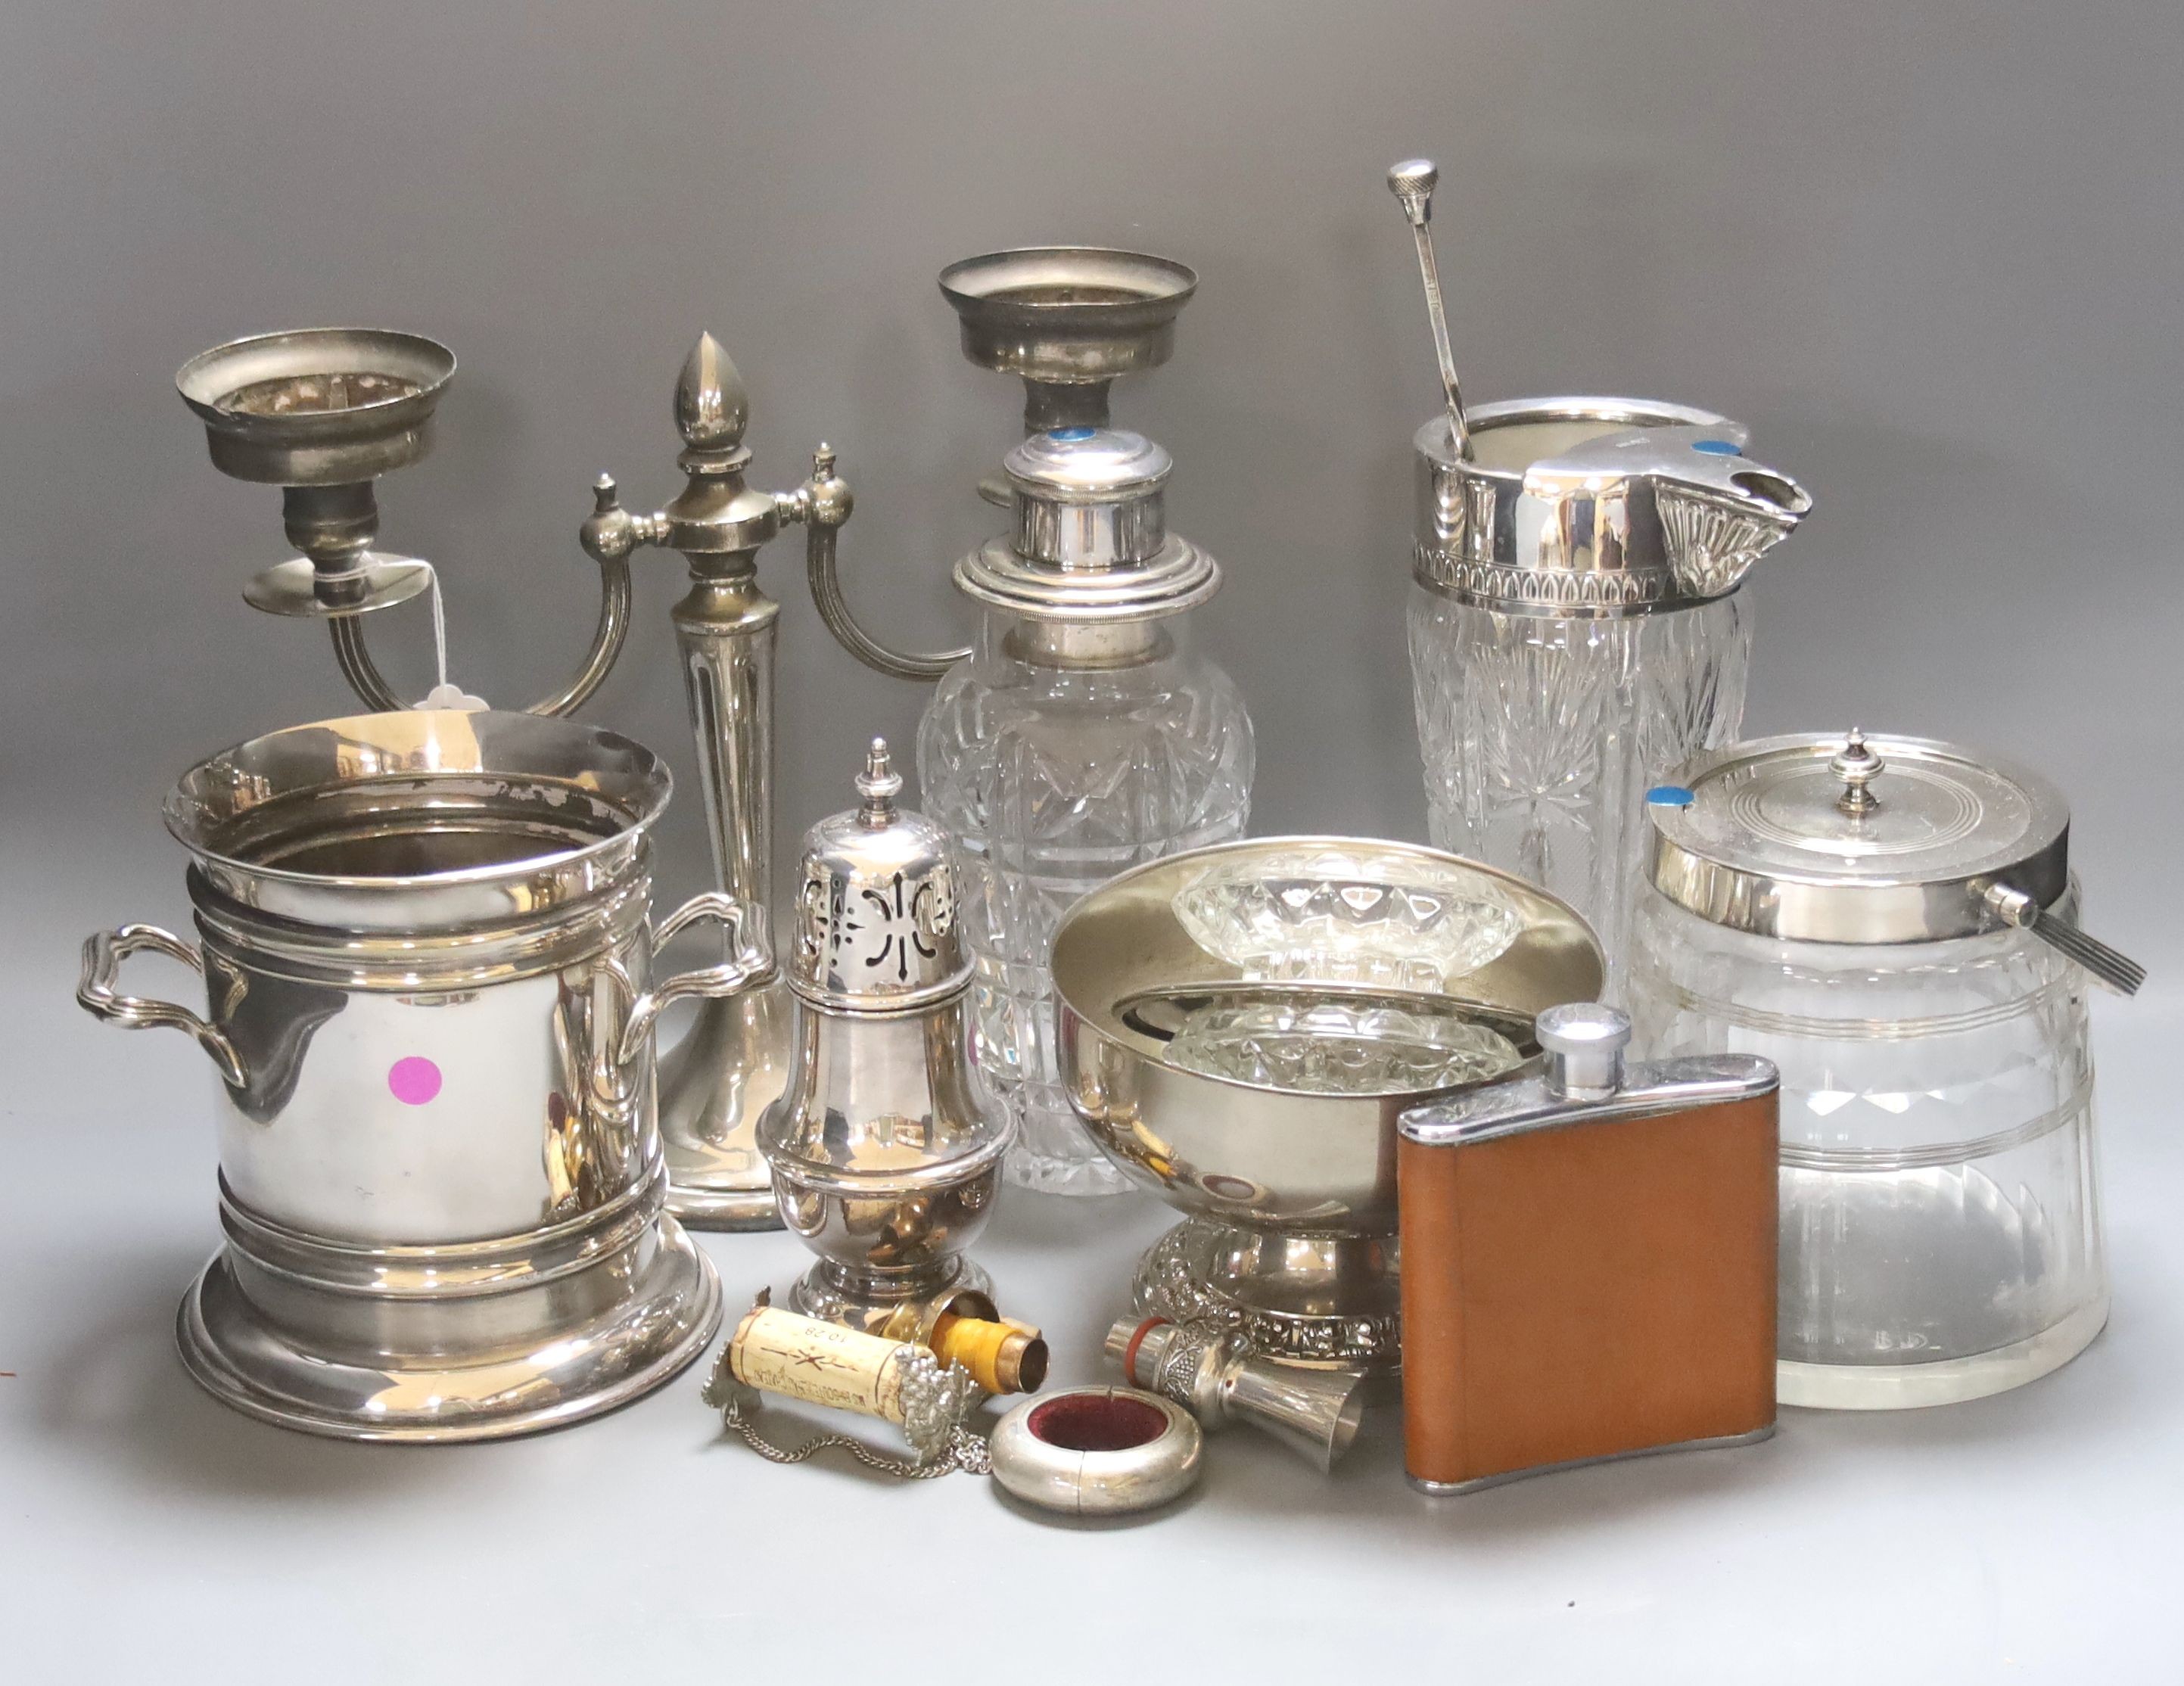 Assorted plated wares including a mounted glass biscuit barrel.